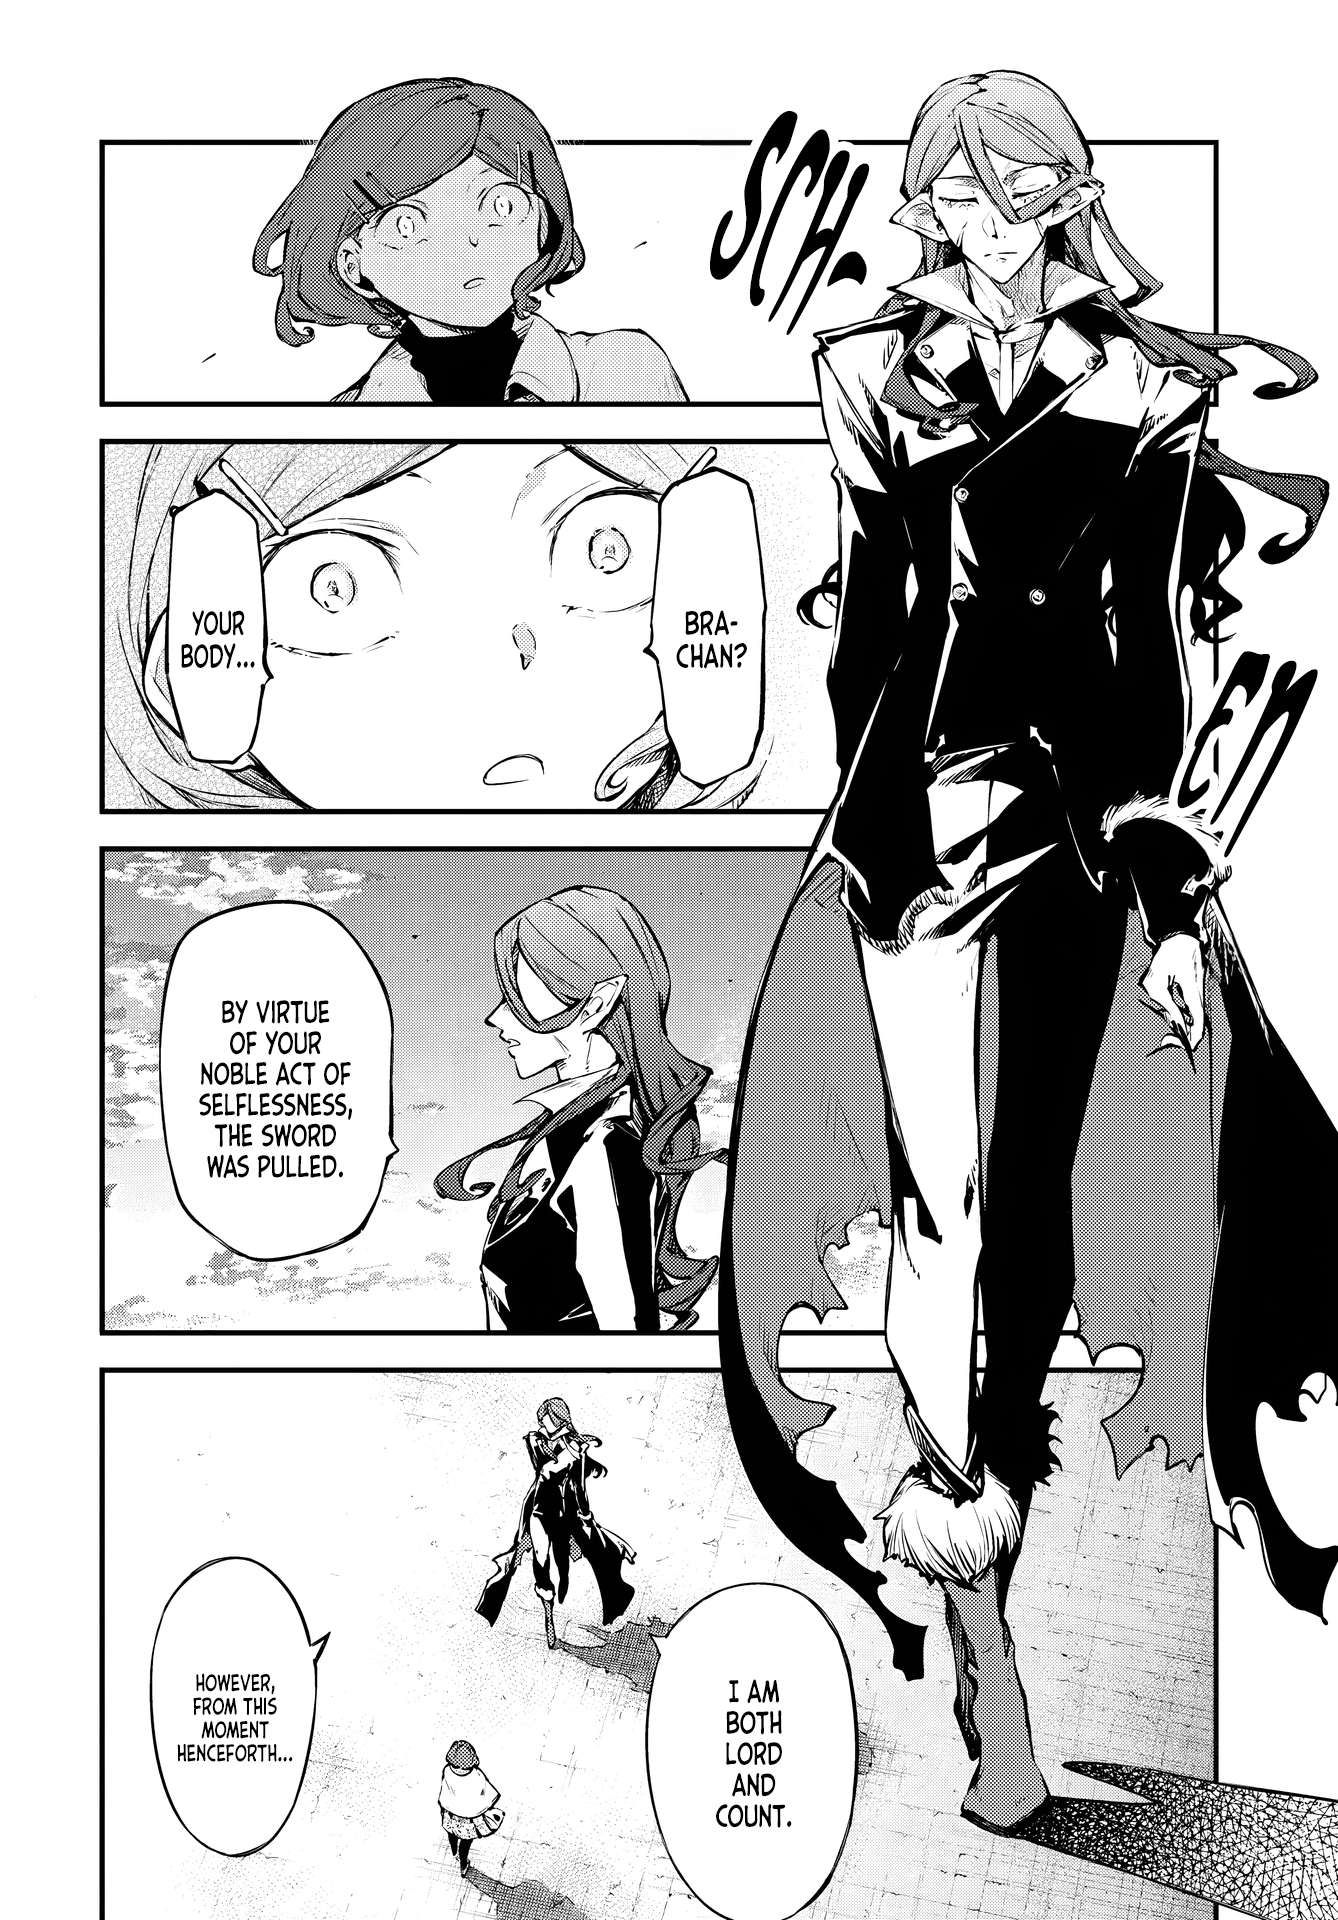 Bungo Stray Dogs chapter 111.5 page 5